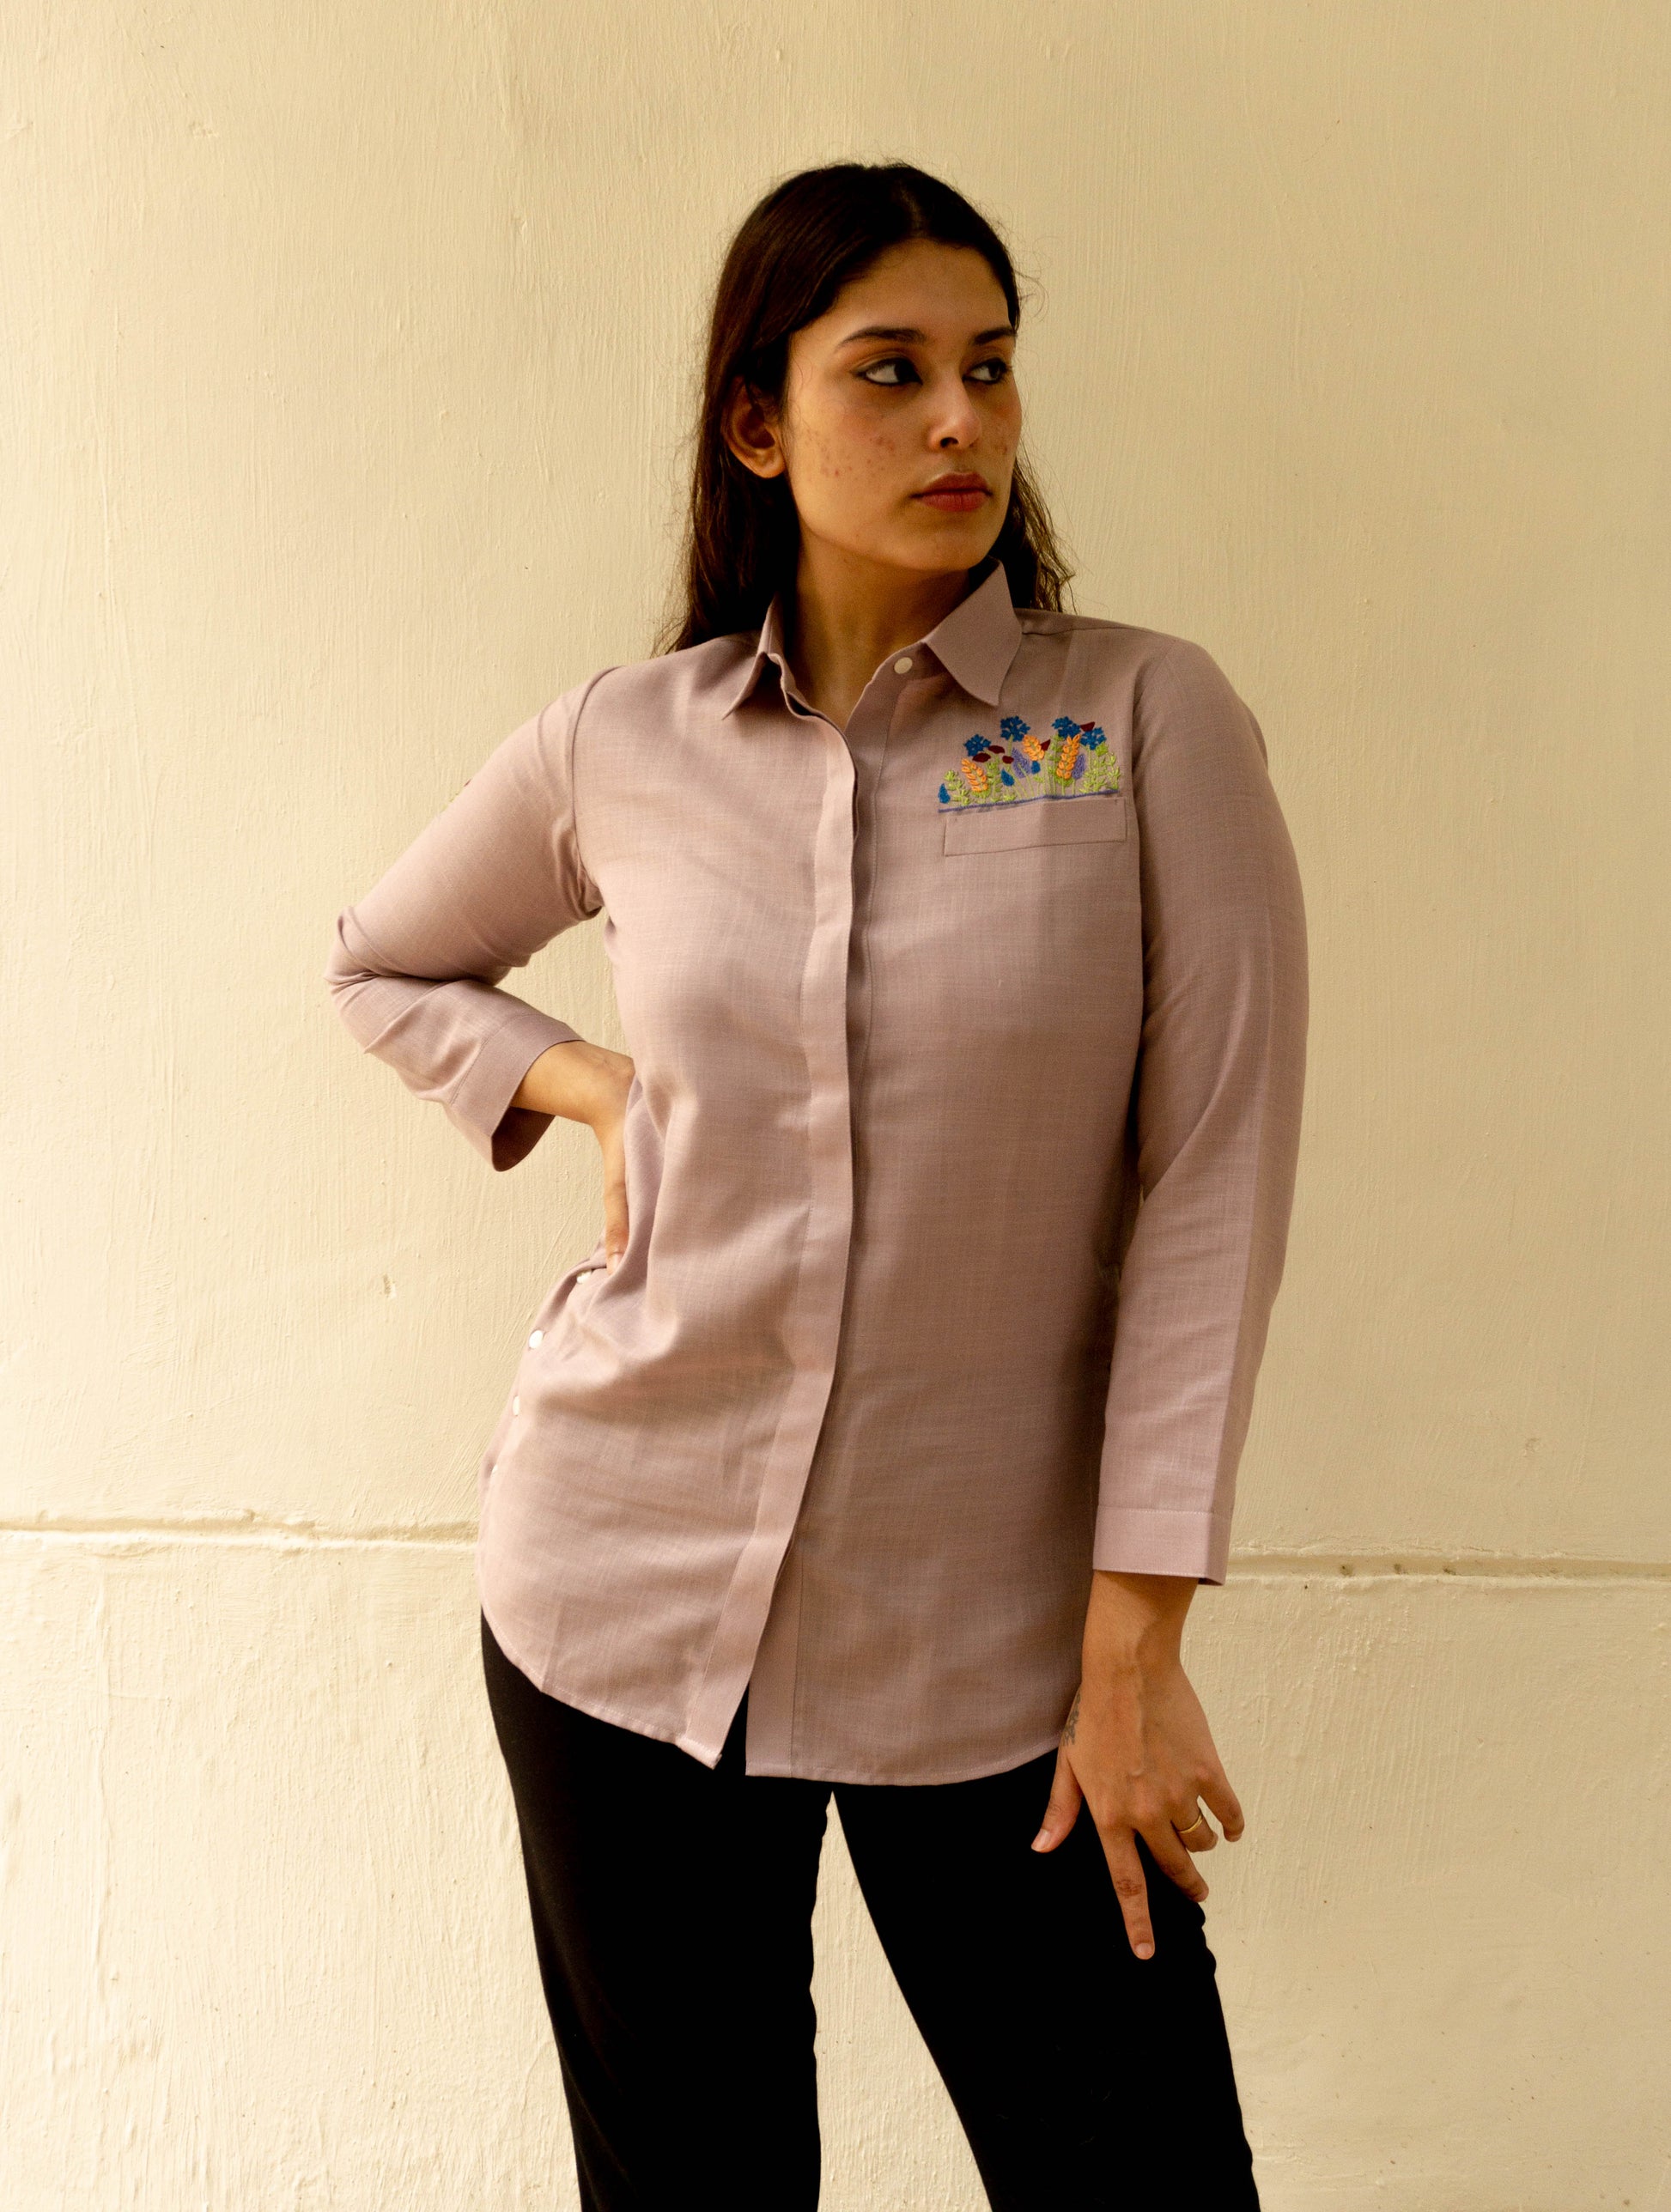 Purple Blouse - Hand Embroidered, Embroidered Tops and Blouses for Women, Purple Tunic Shirt, 100% Cotton Summer Shirts for Women